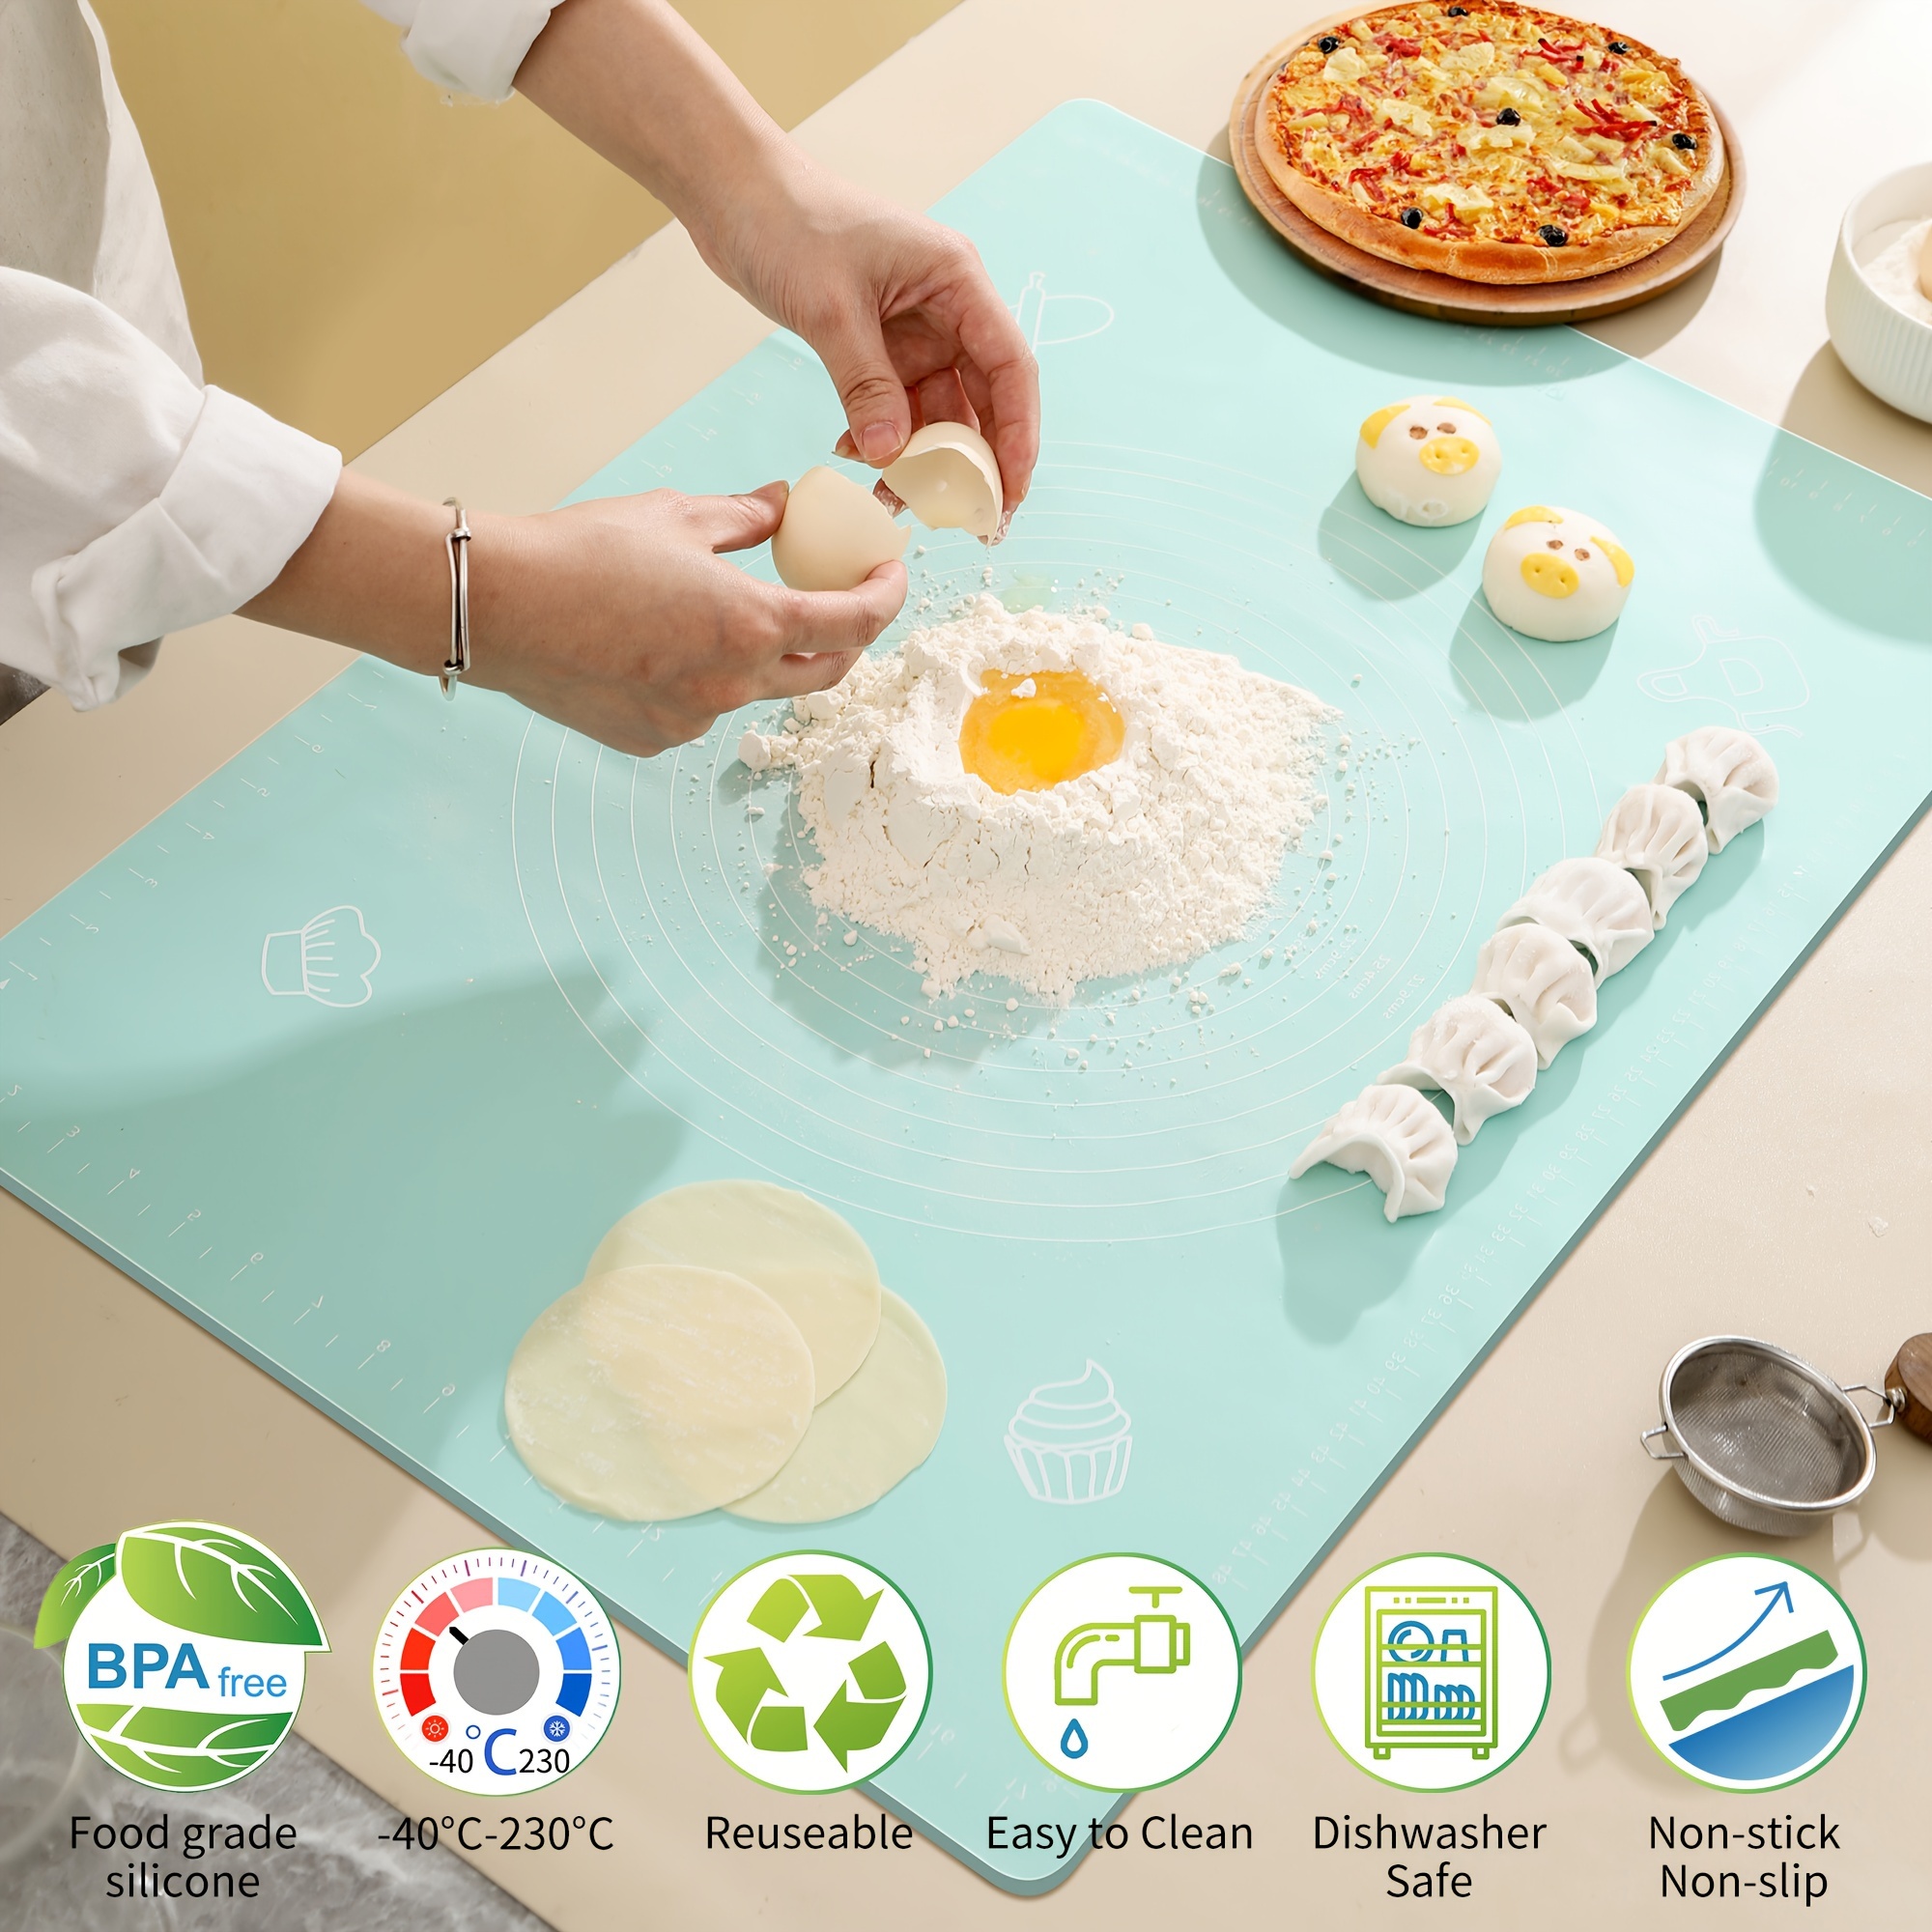 Silicone Mats for Kitchen Counter, Nonslip Silicone Mats for